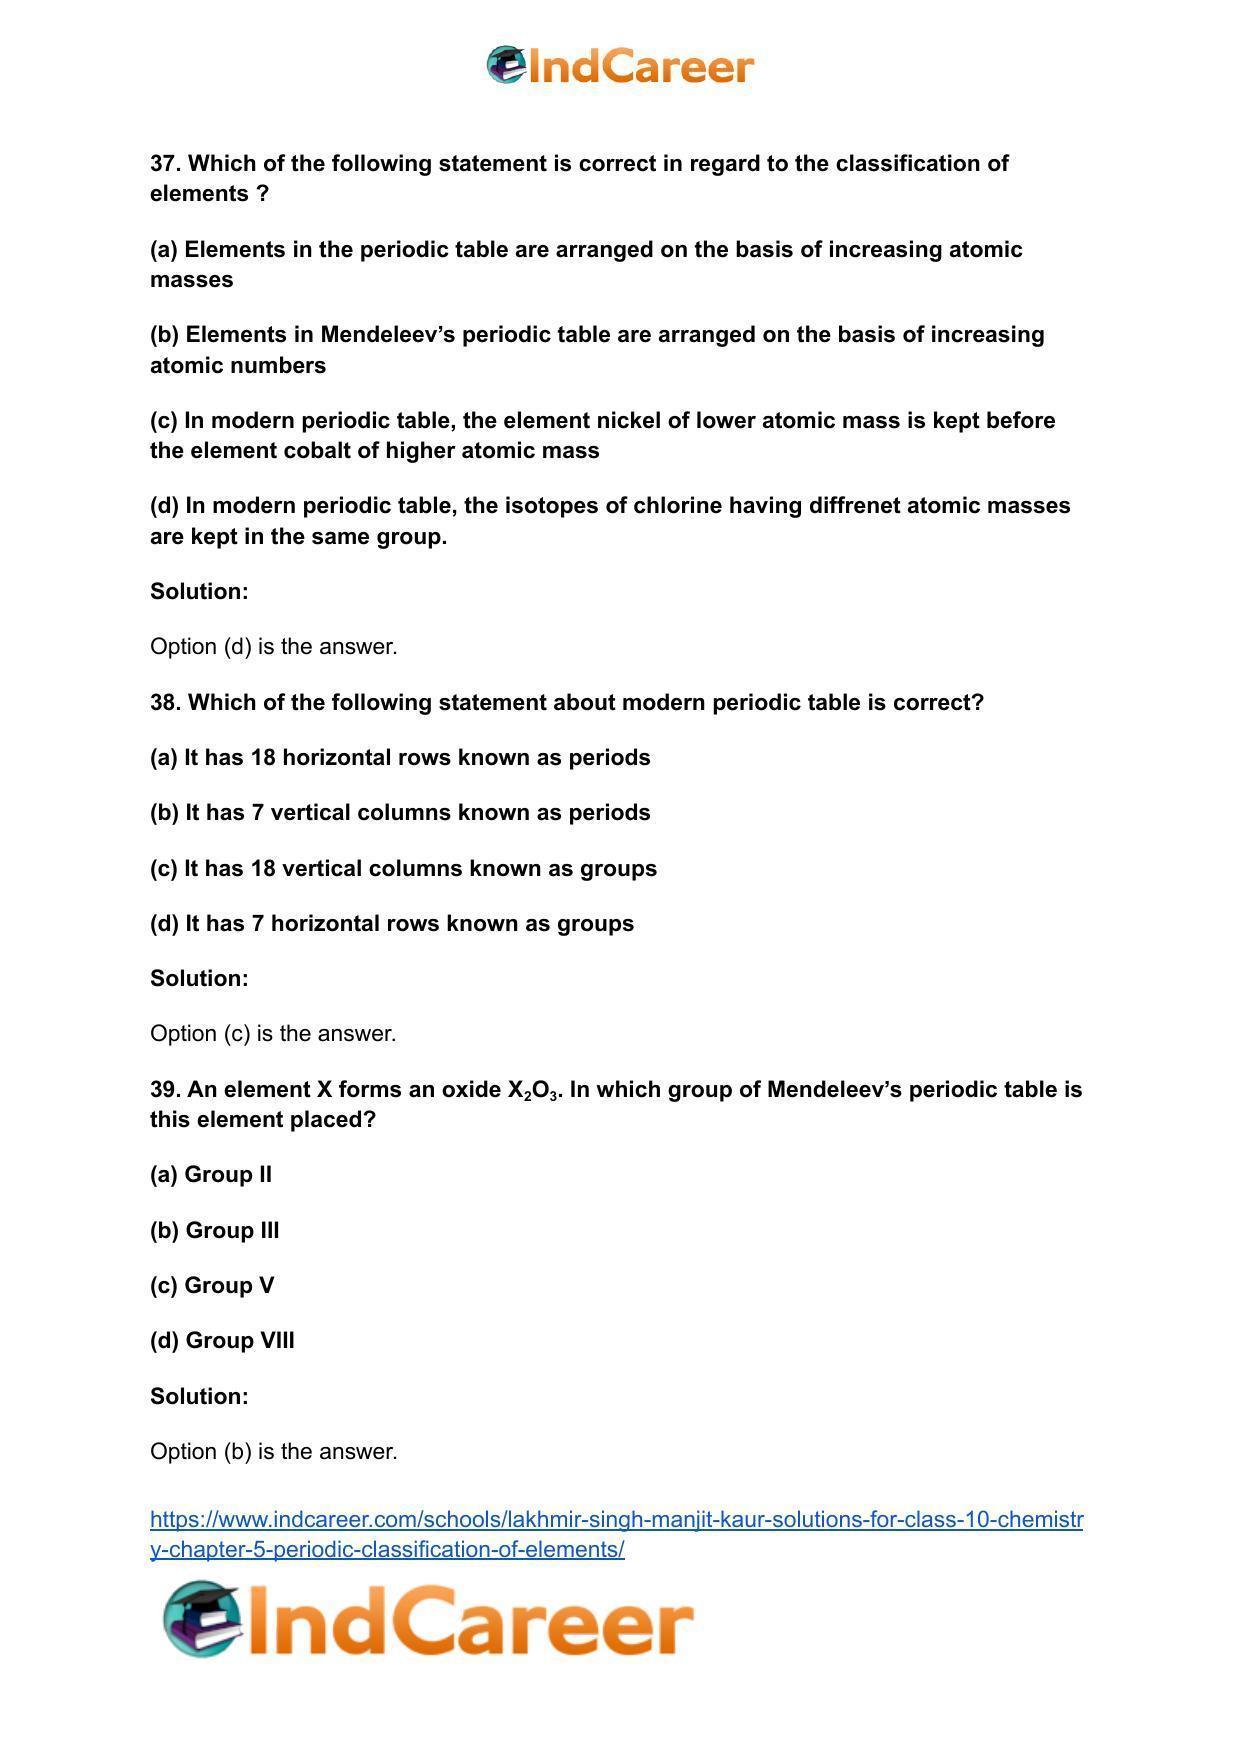 Lakhmir Singh Manjit Kaur  Solutions for Class 10 Chemistry: Chapter 5- Periodic Classification Of Elements - Page 15